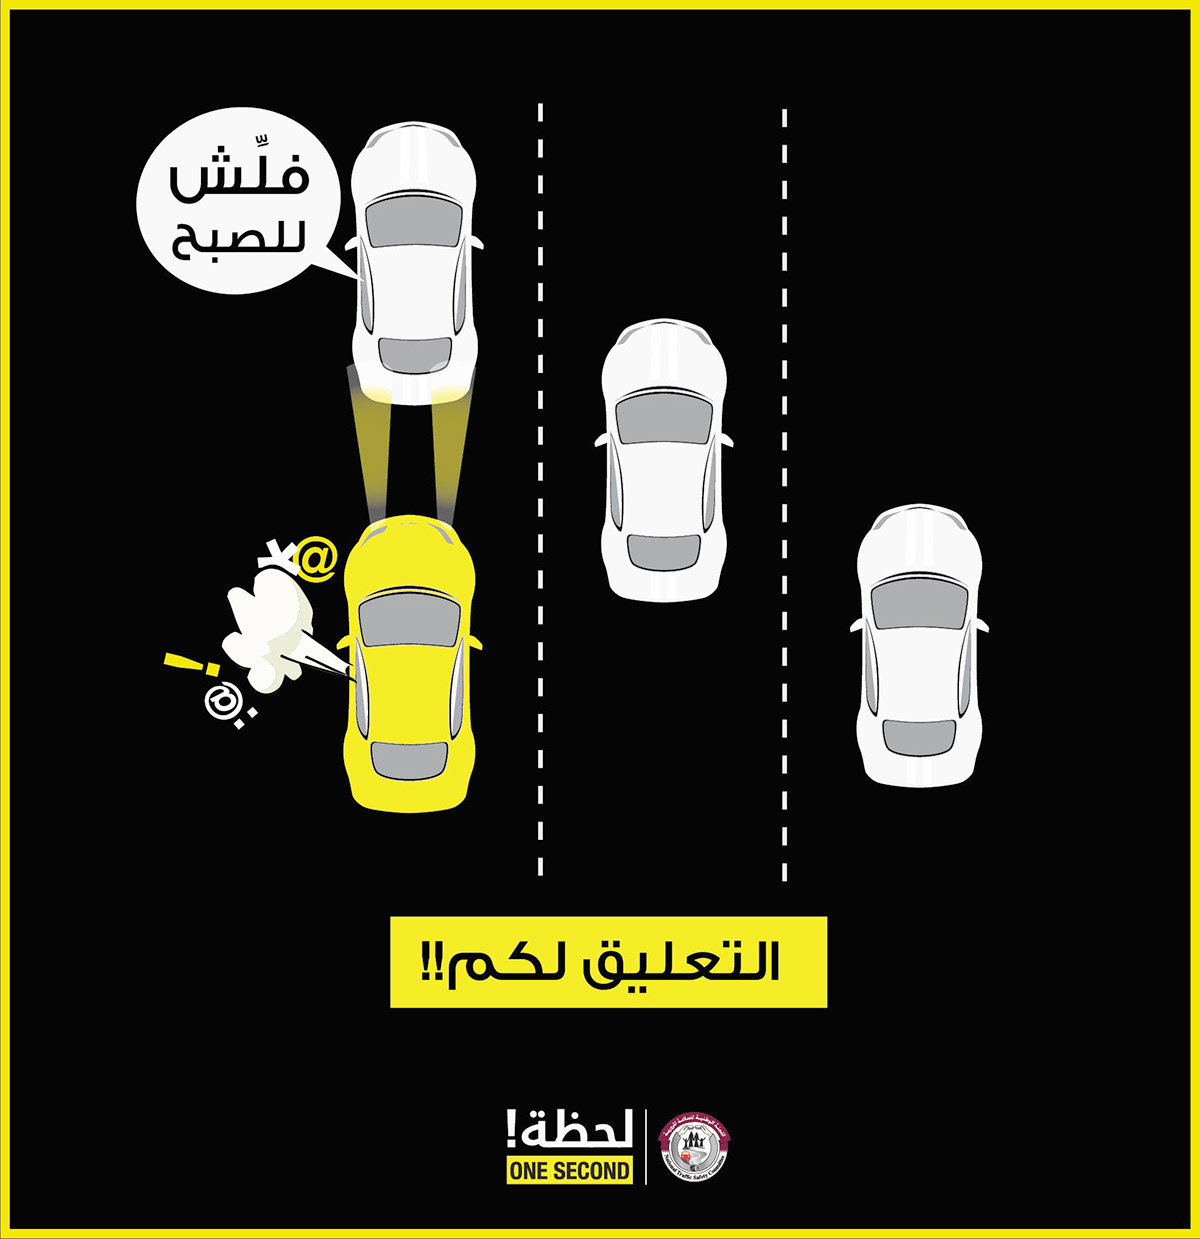 Road Safety social media icons Scenarios Layout design type safety campaign One Second